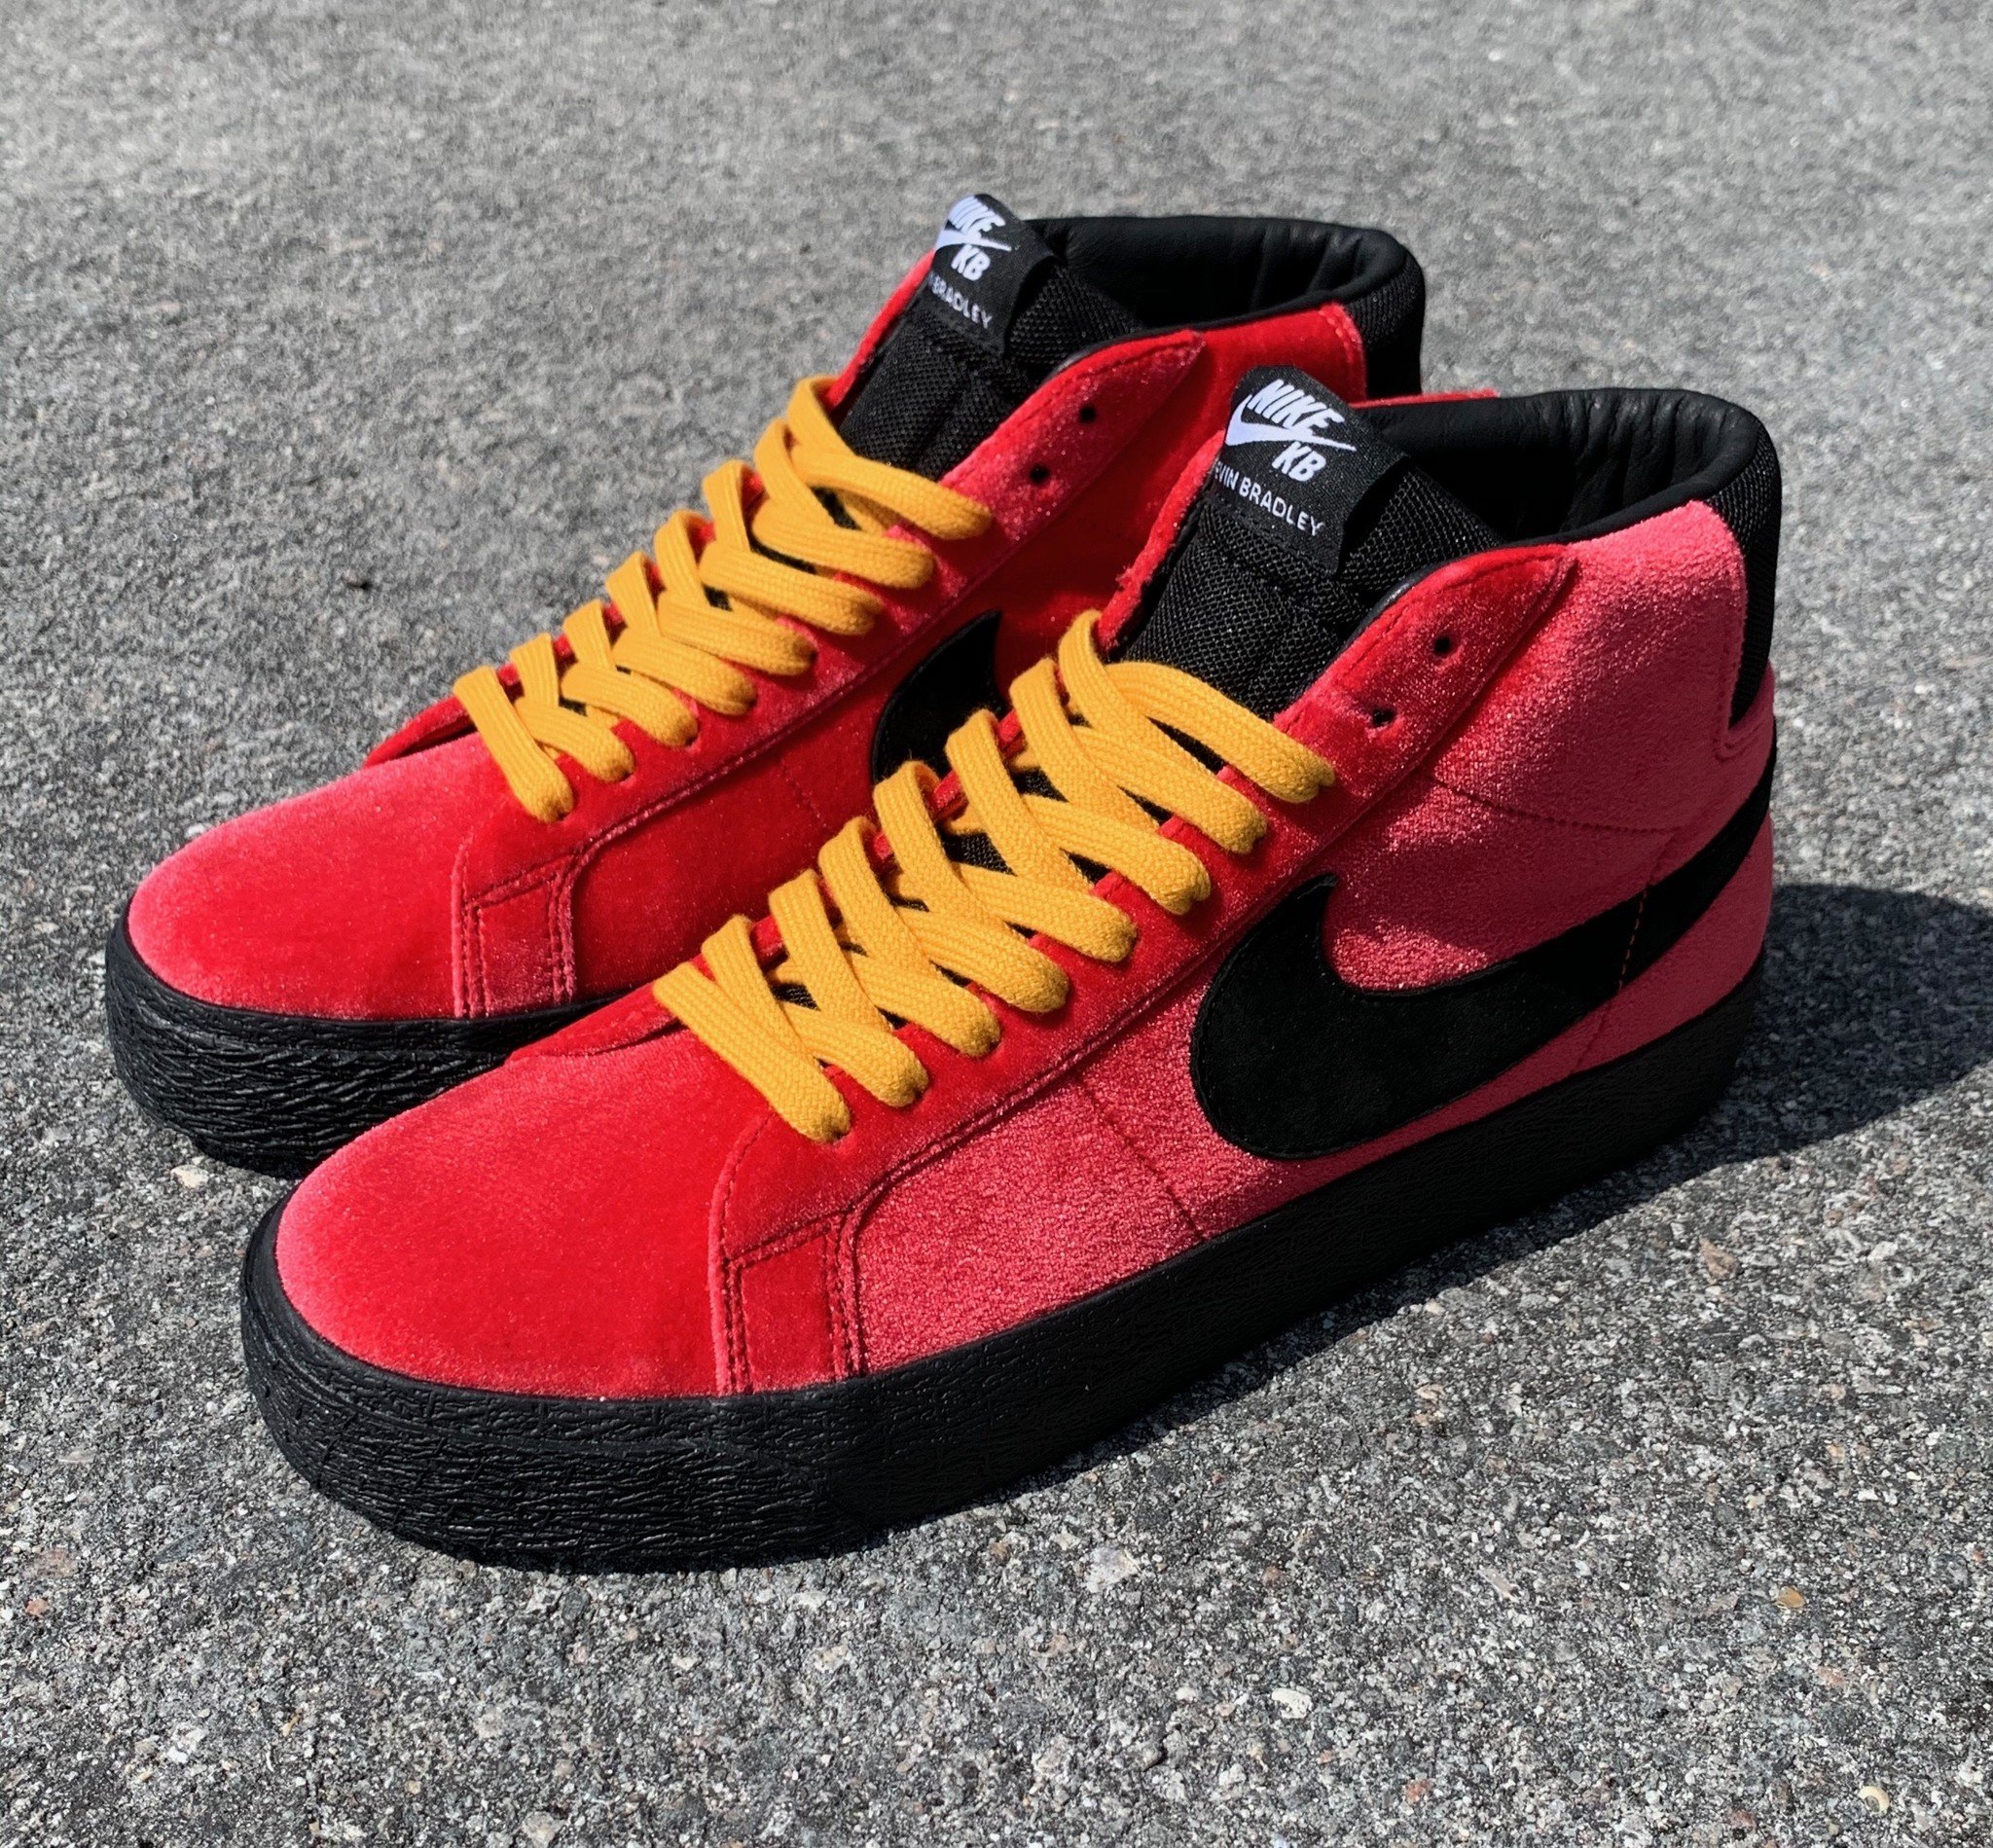 kevin and hell nike sb where to buy